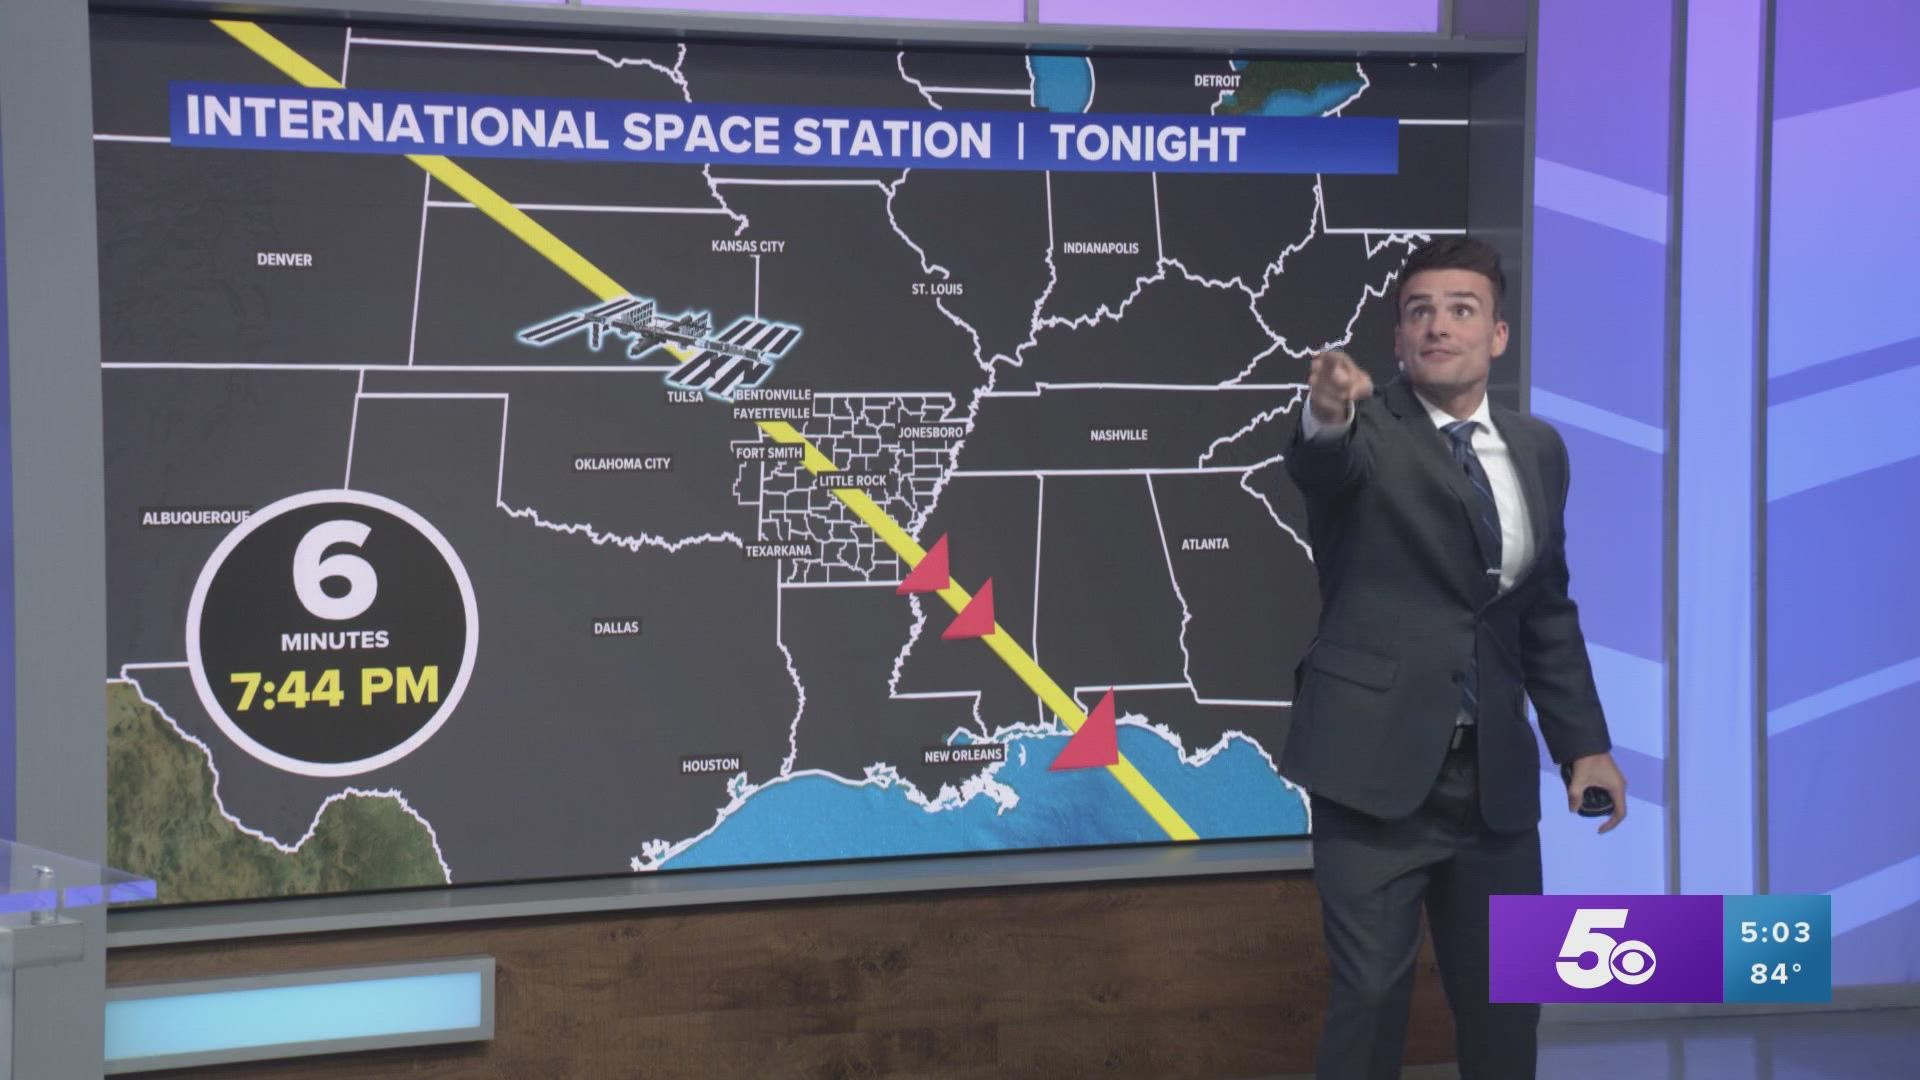 The ISS flies over all the time, but its timing and position are not always directly above Arkansas for a bright view of the station just after sunset.